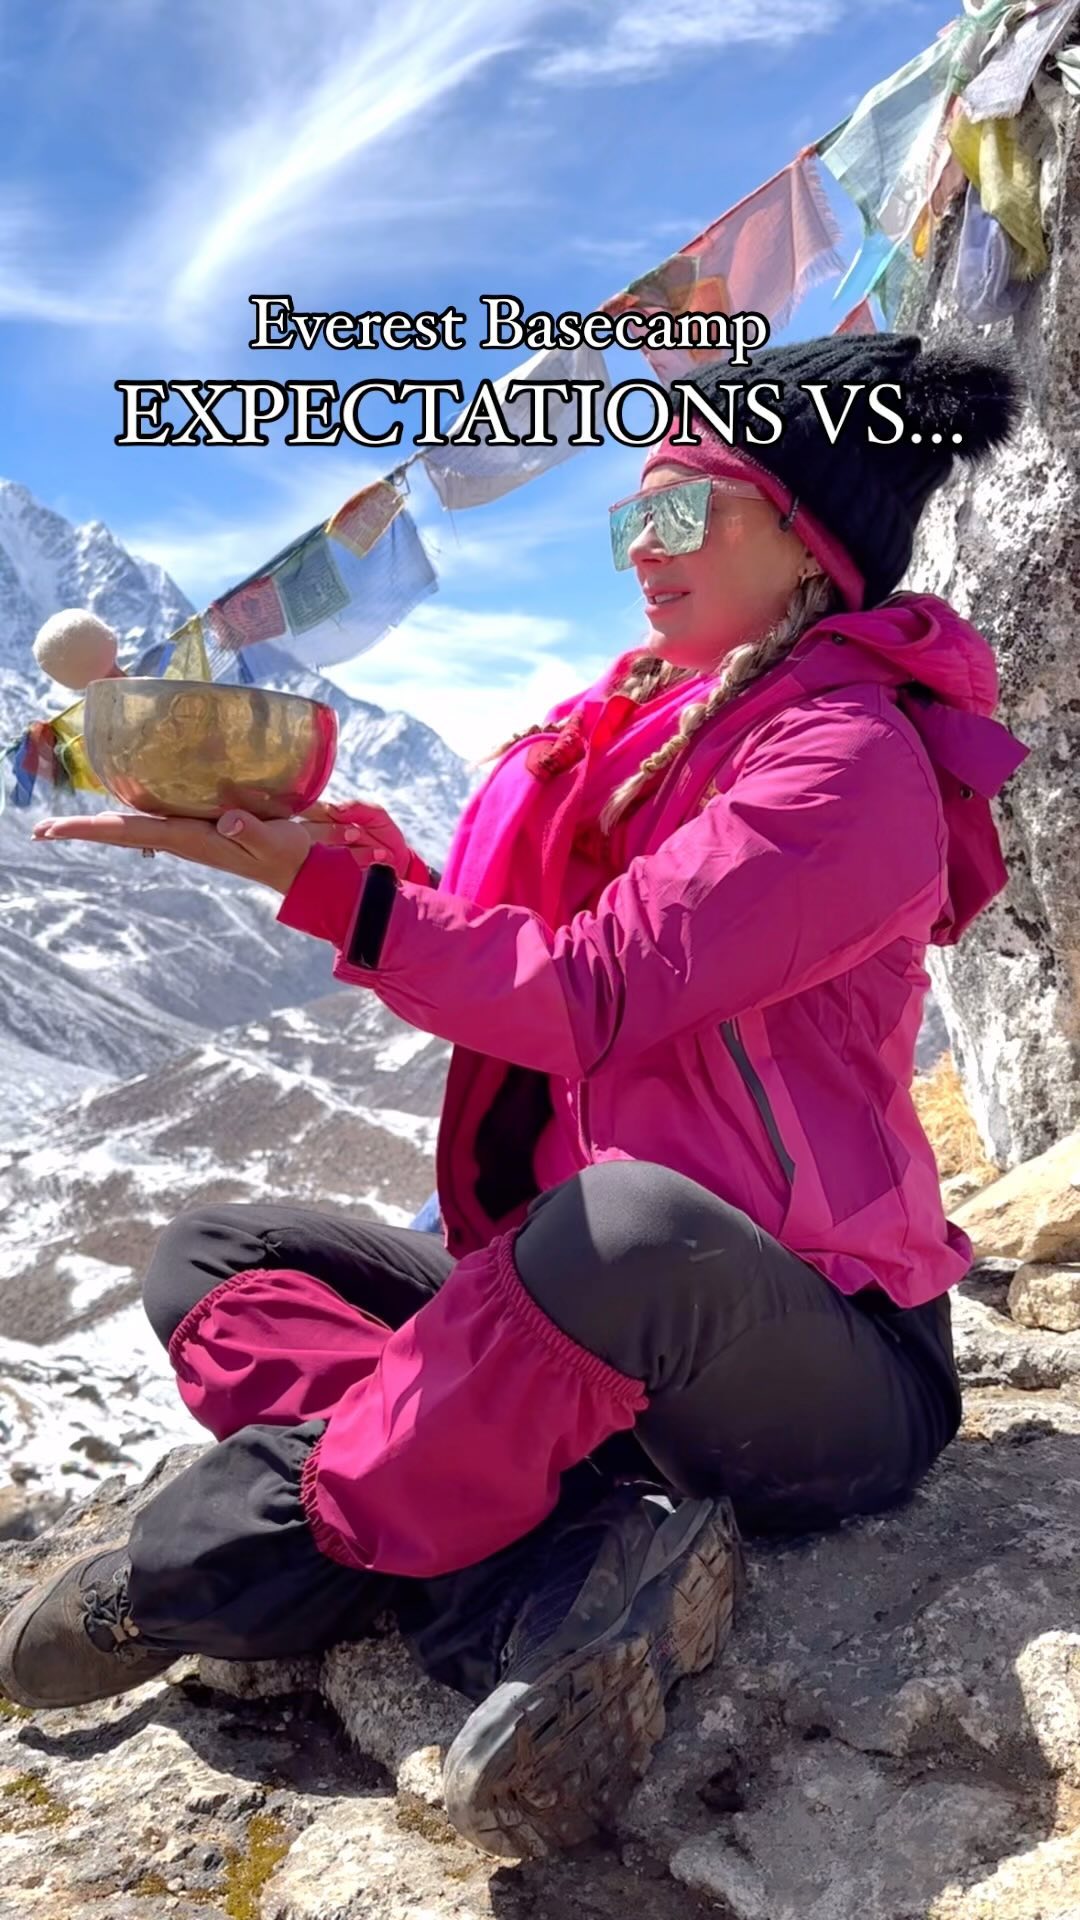 I prefer the highlights but I hear showing the struggles of travel is more relatable so here they are for my Everest Basecamp trek!

Main struggle: it was extremely cold at night. That’s right, it wasn’t the long treks, ascents, or even descents…the hardest part for me was being cold whenever we weren’t trekking.

I took everyone’s advice (thanks cold-weather people), and my own from doing Antarctica, Svalbard, and Kili Summit — the three coldest destinations I’ve ever experienced…and still was painfully cold most nights 🥶😂

In fact, despite the “sleep with one layer on inside your sleeping bag”-theory, I figured out how to be most warm by sleeping with all of my clothes on, plus my water bottle filled with hot water, and sometimes if we had electricity, the heated blanket!

Second struggle: ascents at high altitude. The diamox pills helped, but it was still hard, and at one point I wondered if I was running out of oxygen (the clip of my finger reading my O2 levels at 69%)

Third struggle: I’m a picky eater, and the menu is the same every day, which I quickly lost an appetite for, which is dangerous since you need to eat 30% more than normal to trek for so long. I ate mostly ramen and snacks…and pancakes drenched in honey….that part wasn’t a struggle.

Fourth half struggle: I got my full on period one hour into the 12 hour Basecamp day trek. Luckily someone had a tampon, but I haven’t used one in like 7 years (I use menstrual cup) so it wasn’t exactly comfortable, not to mention…cold…if you know what I mean. 

That’s about it. The bathrooms were actually all pretty clean minus that one shower in the video that felt like I was in a horror movie (I’ll post highlight reel anyway of the teahouse). It was also way easier being on my period on EBC than Kili simply bc there were bathrooms!

Speaking of bathrooms, I’ve had a couple ppl who haven’t done this trek say things like “pack in and packet out 💩”, so let me clarify and emphasize: there ARE TOILETS throughout the EBC trek…it’s the summit that has the trash problem, and I would never do that trek!

Which of these struggles would make this trip hardest for you?

#everest #everestbasecamp #mylifesatravelmovie